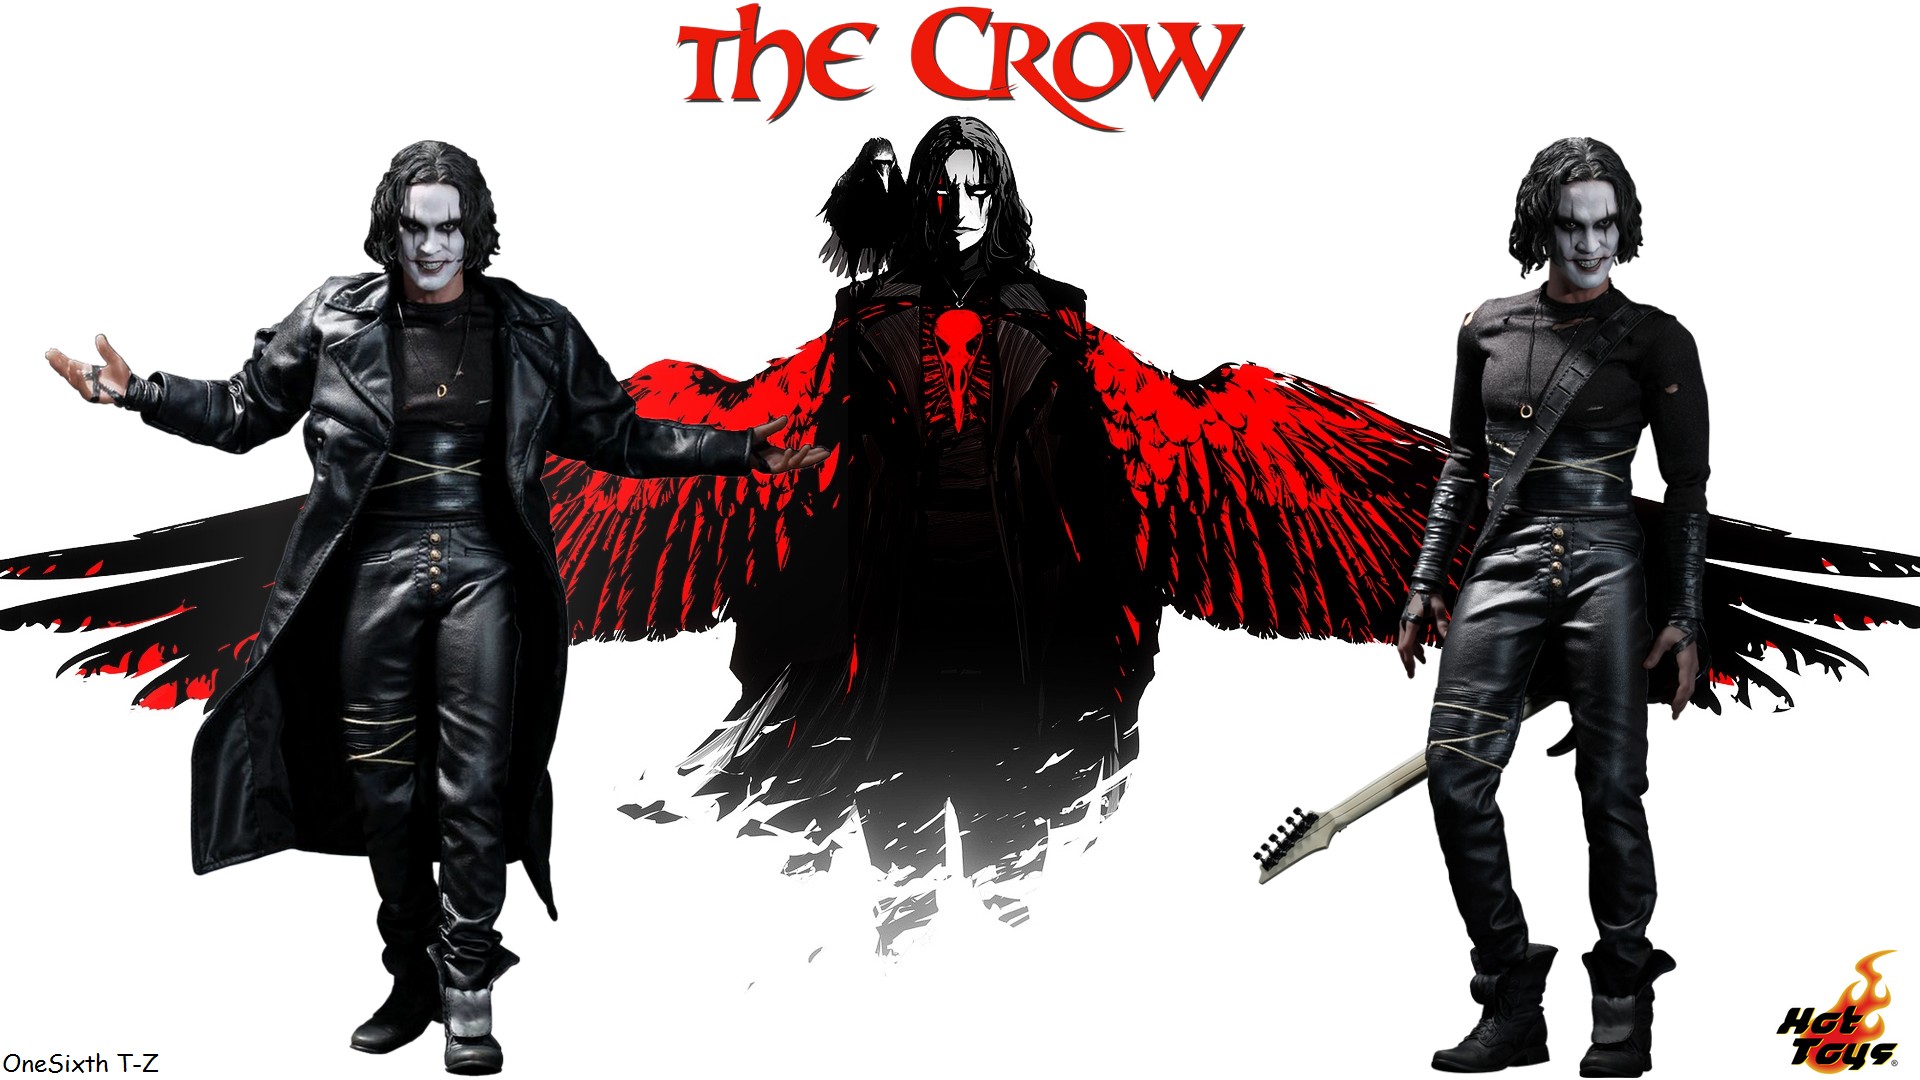 The Crow HD Wallpaper By Onesixth T Z Hot Toys